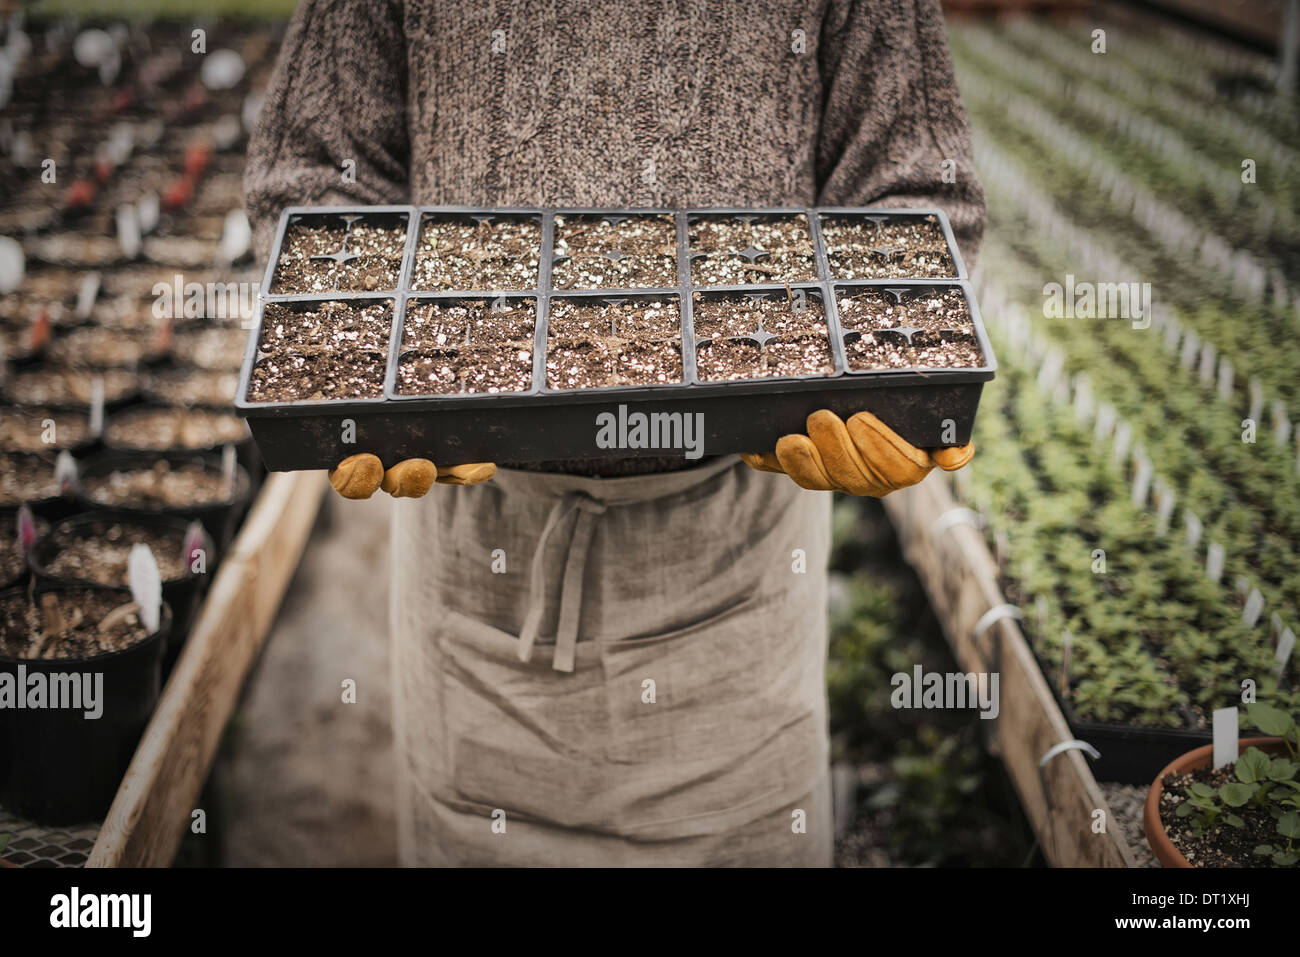 A man holding trays of young plants and seedlings Stock Photo